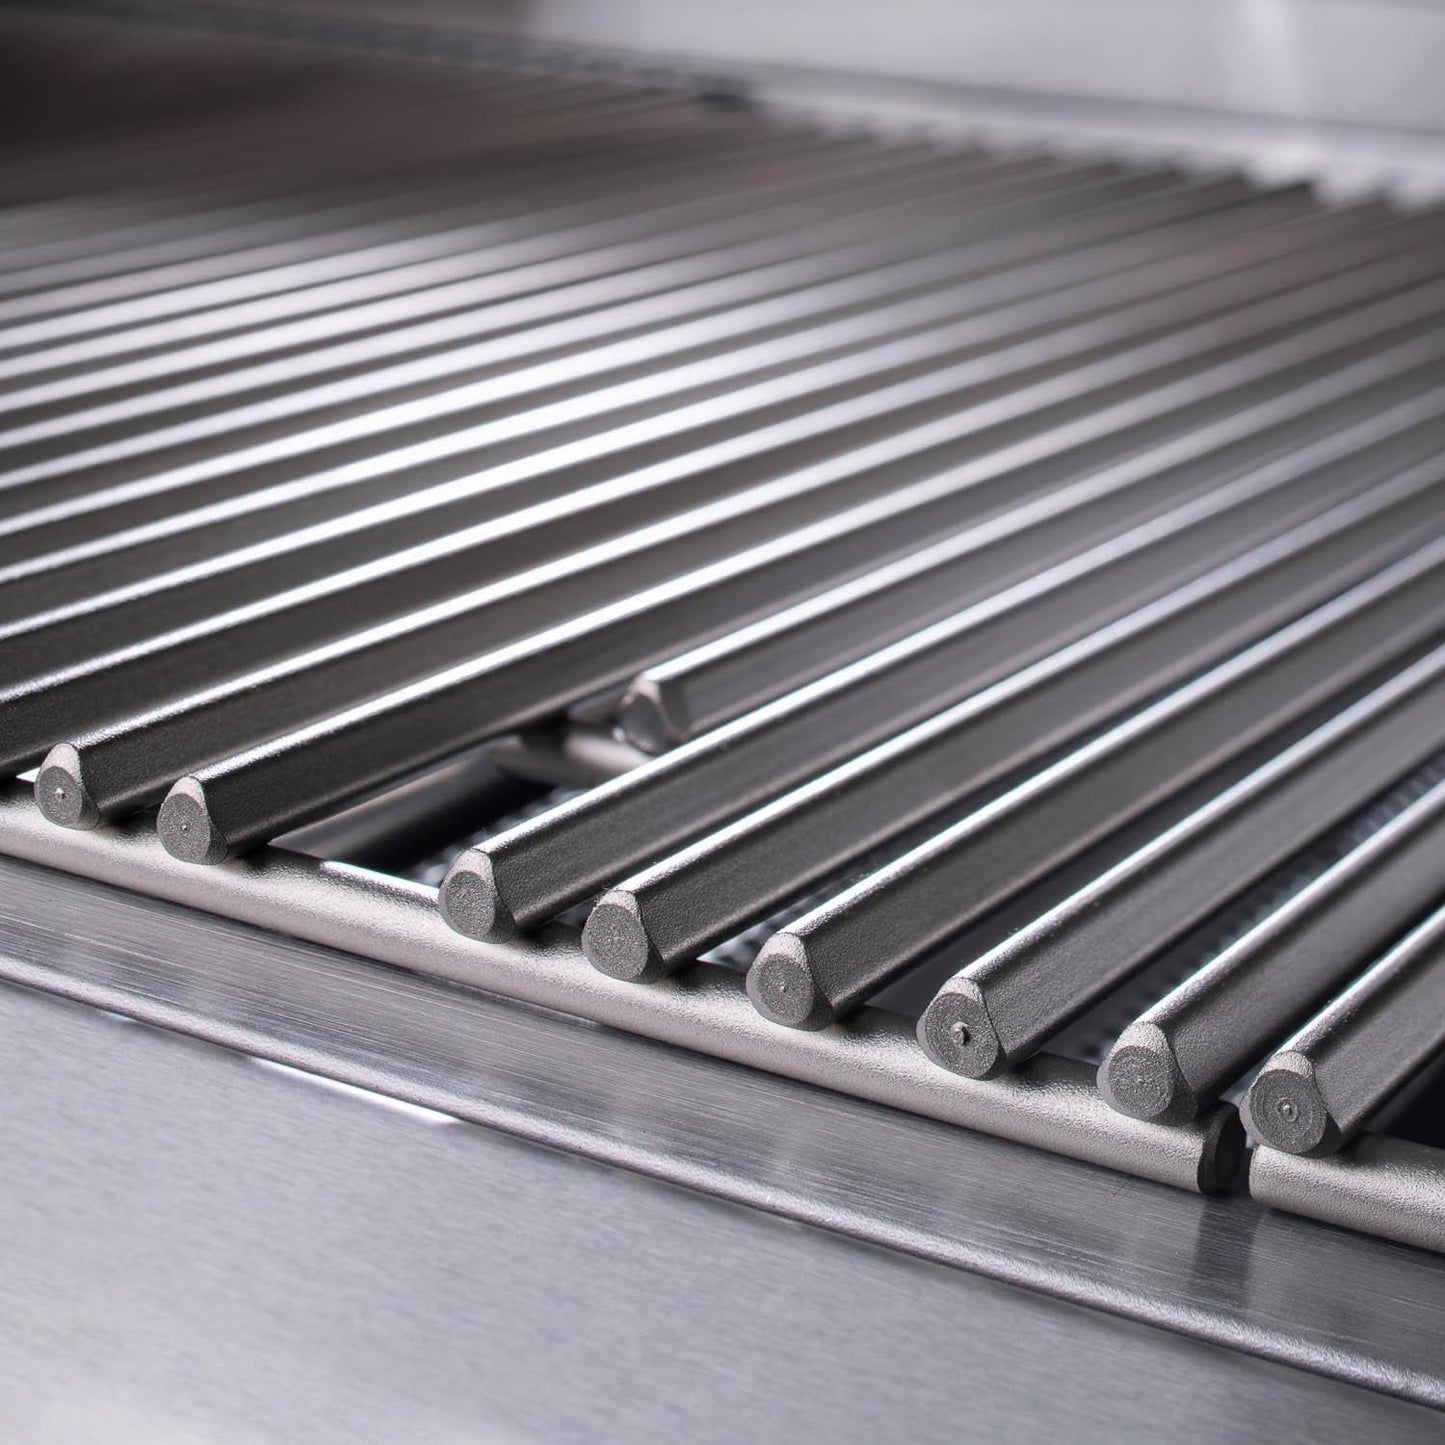 Blaze - BLZ-4LTE2 - Premium LTE 32-Inch 4-Burner Built-In Gas Grill - Triangular 9mm Stainless Steel Searing RodsBlaze - BLZ-4LTE2-LP - Premium LTE 32-Inch 4-Burner Built-In Propane Gas Grill - Section Of Cooking Grates RemovedBlaze Offers a Lifetime WarrantyBlaze - BLZ-4LTE2-LP - Premium LTE 32-Inch 4-Burner Built-In Propane Gas Grill - Triangular 9mm Stainless Steel Searing Rods